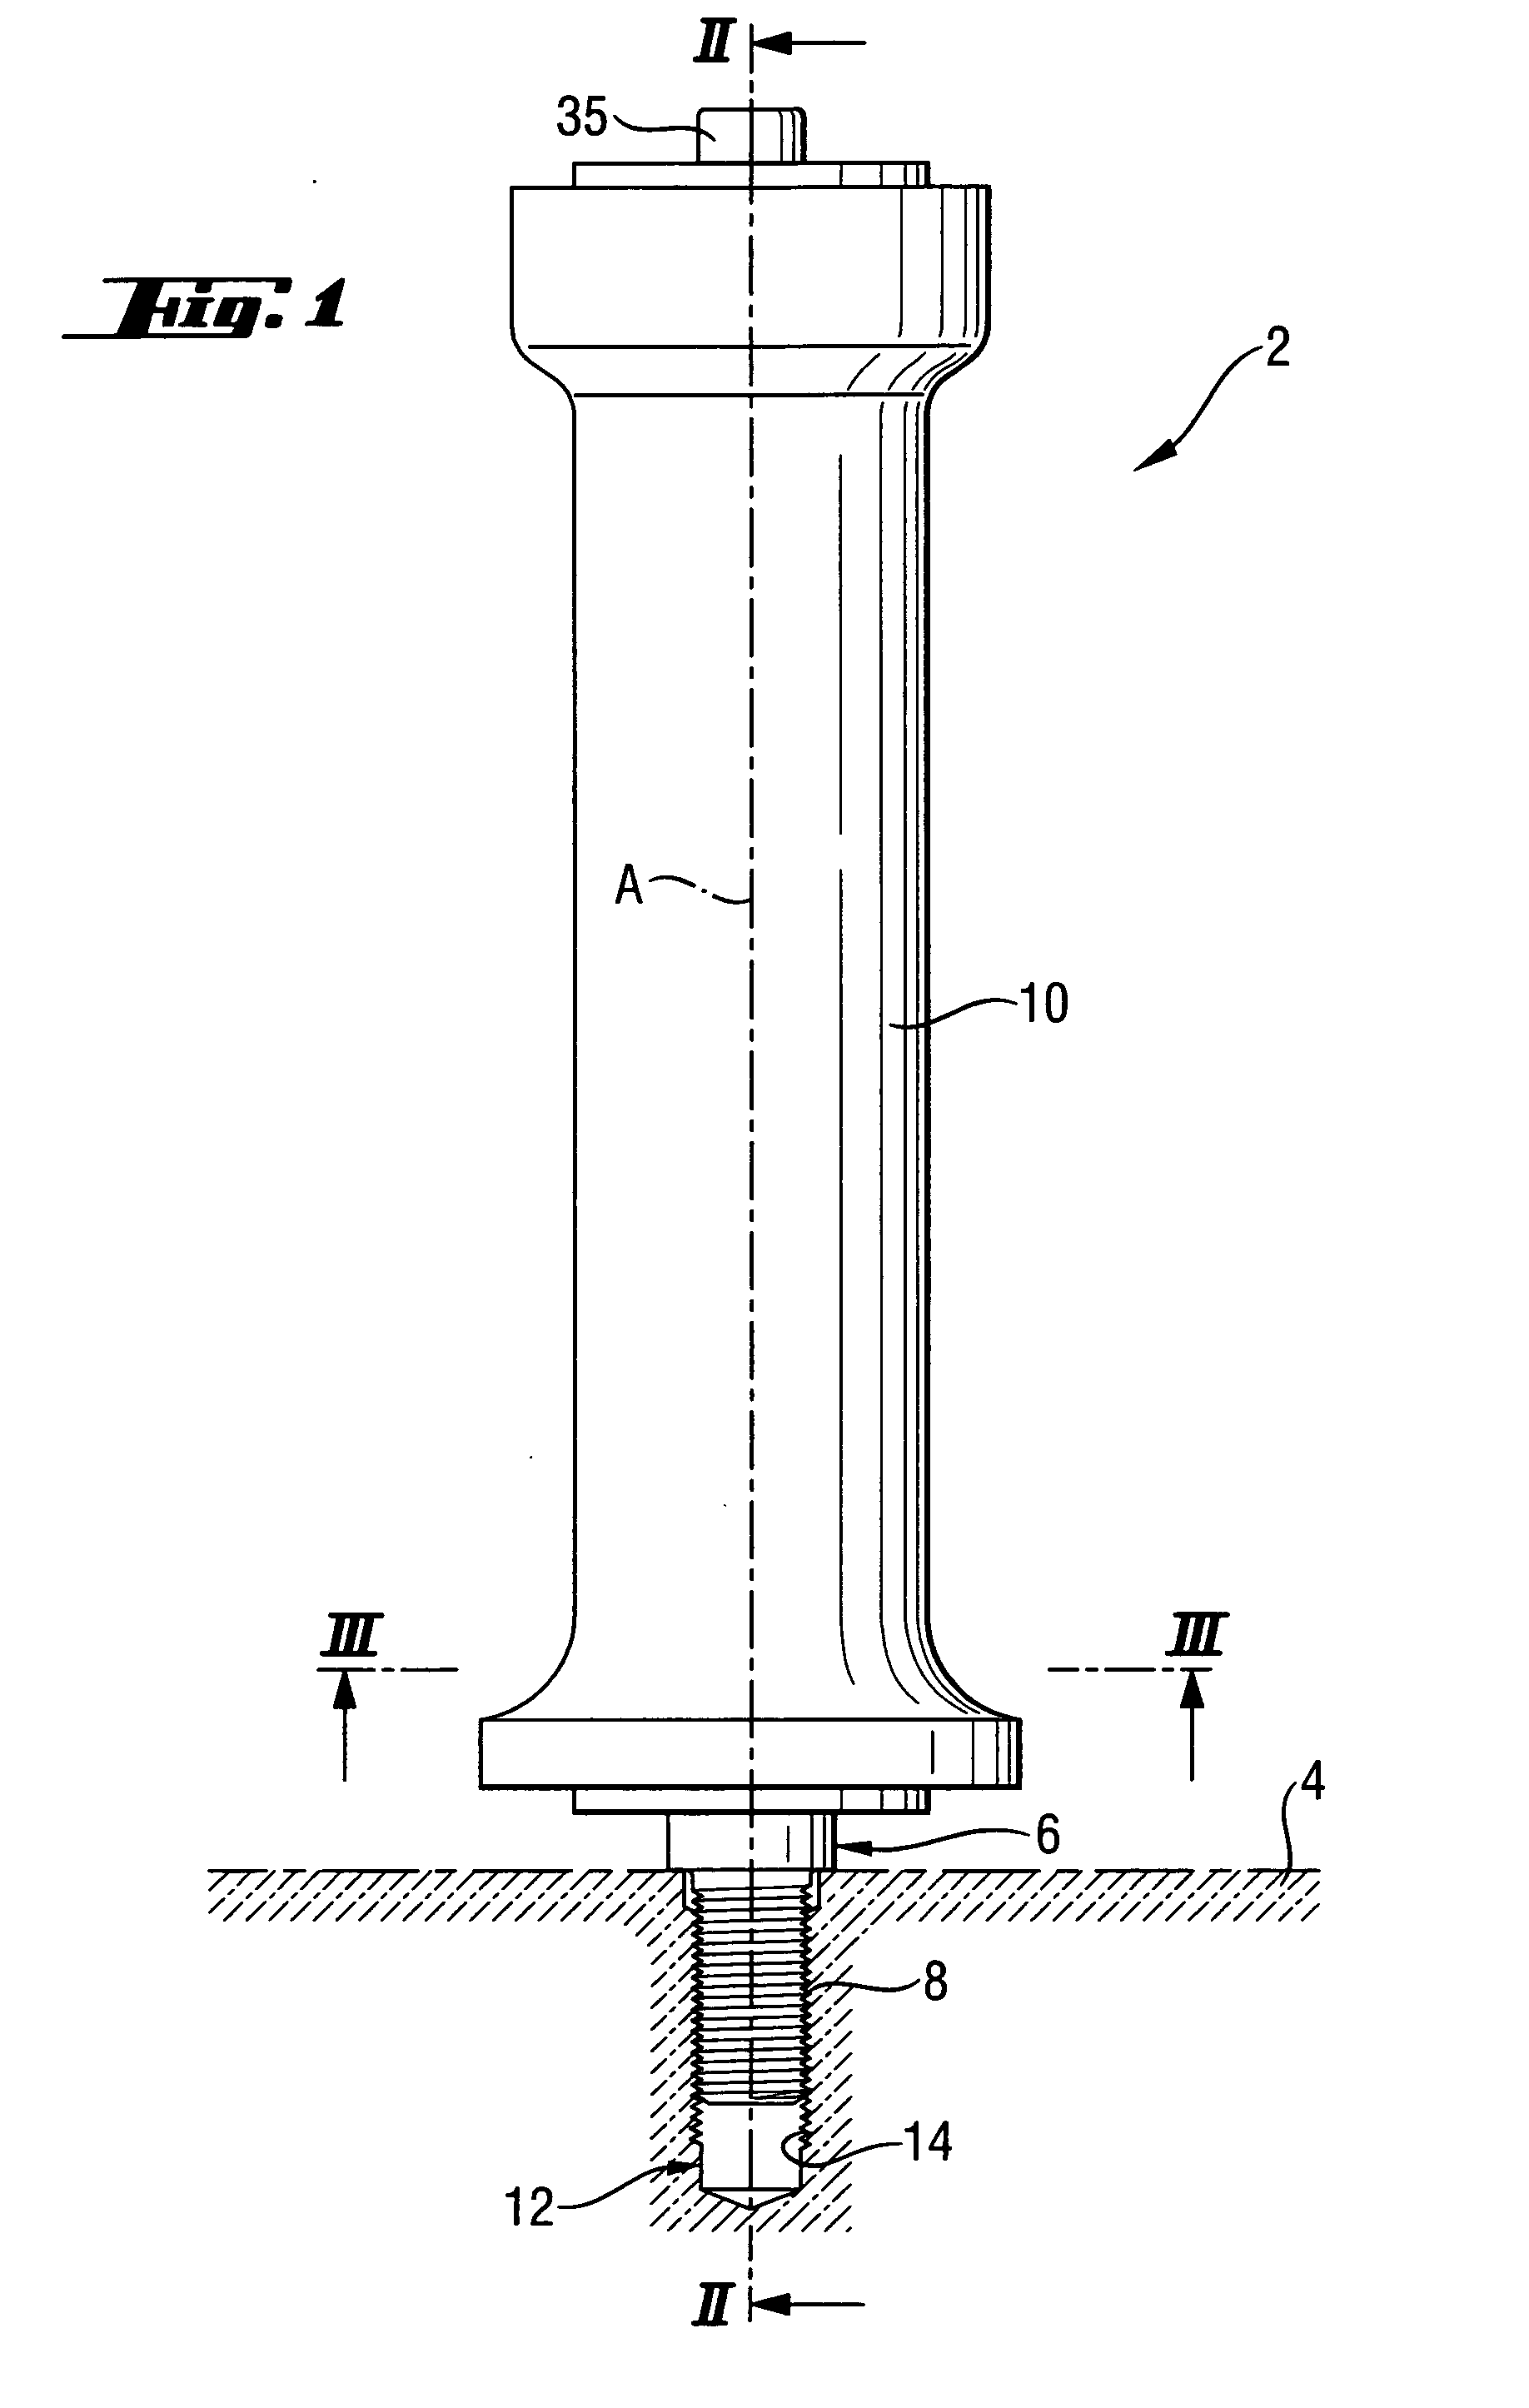 Handle with vibration-reducing device